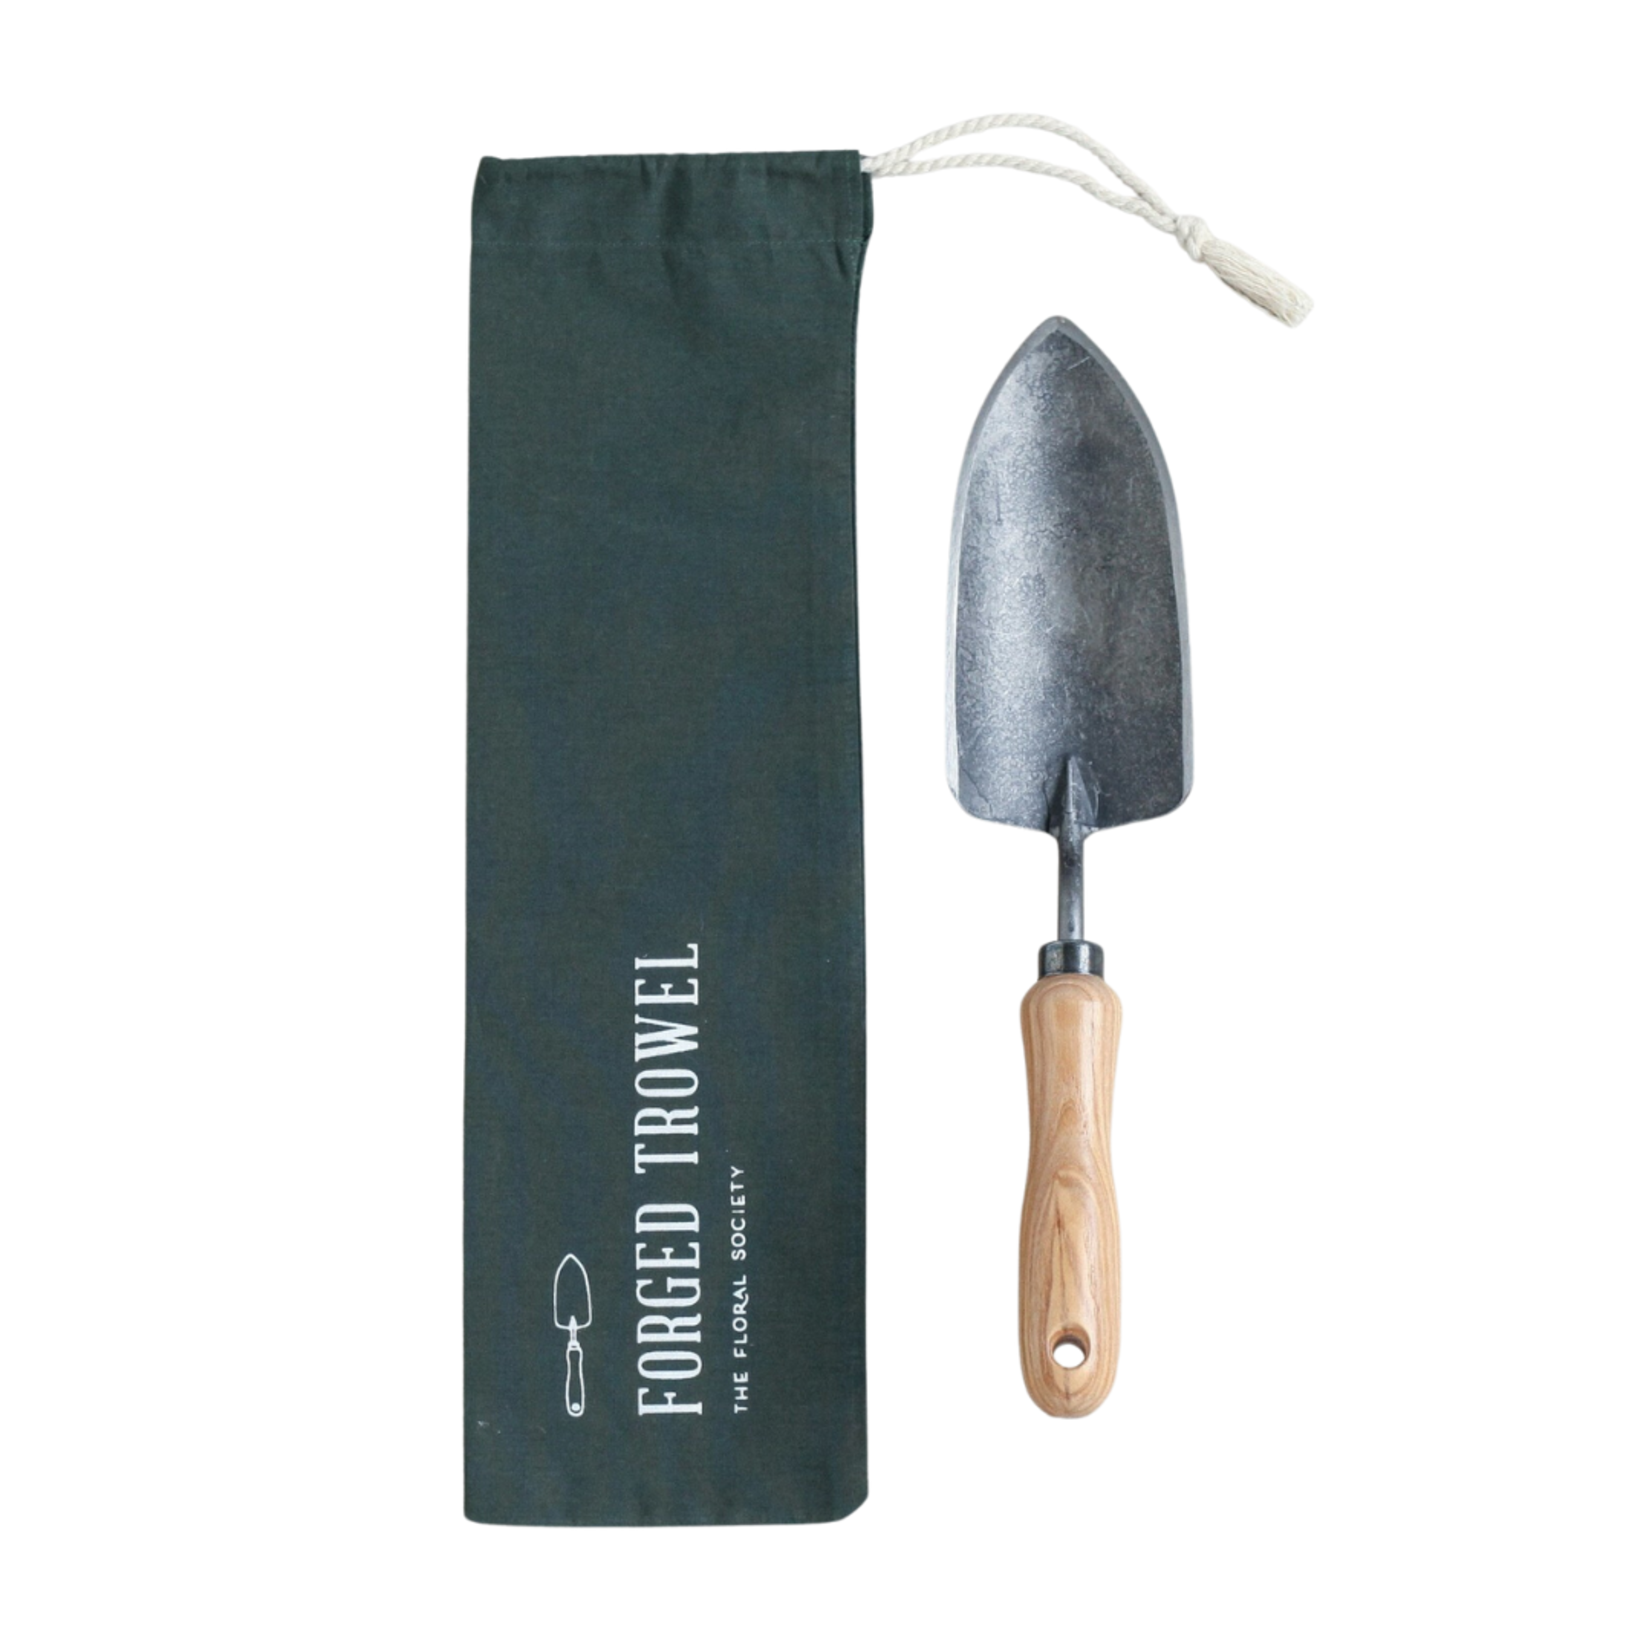 The Floral Society Forged Trowel